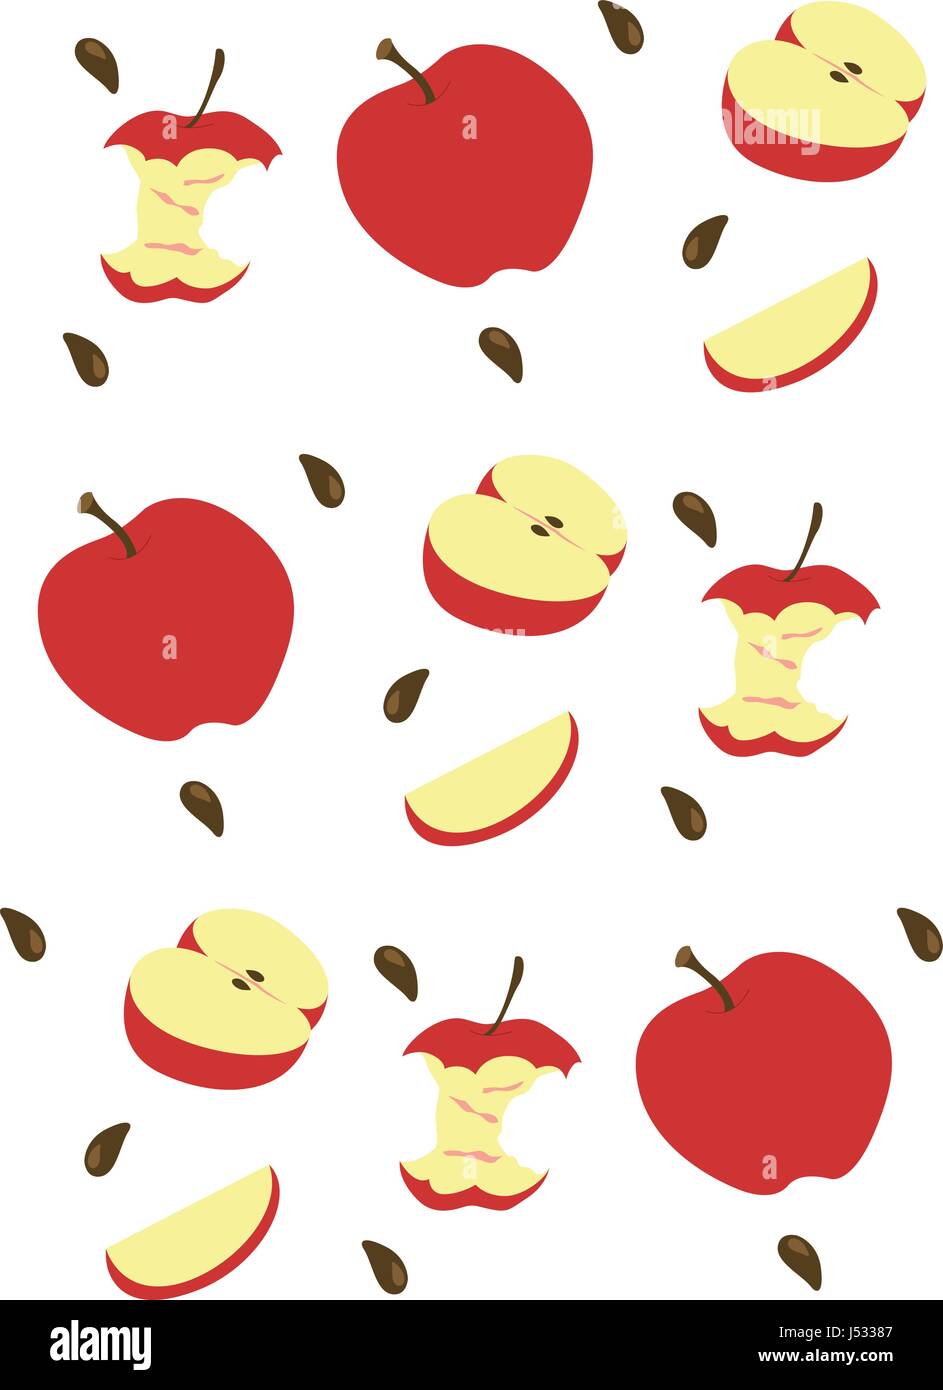 Pattern made with images of whole, cut and almost eaten apples and apple seeds. Stock Vector